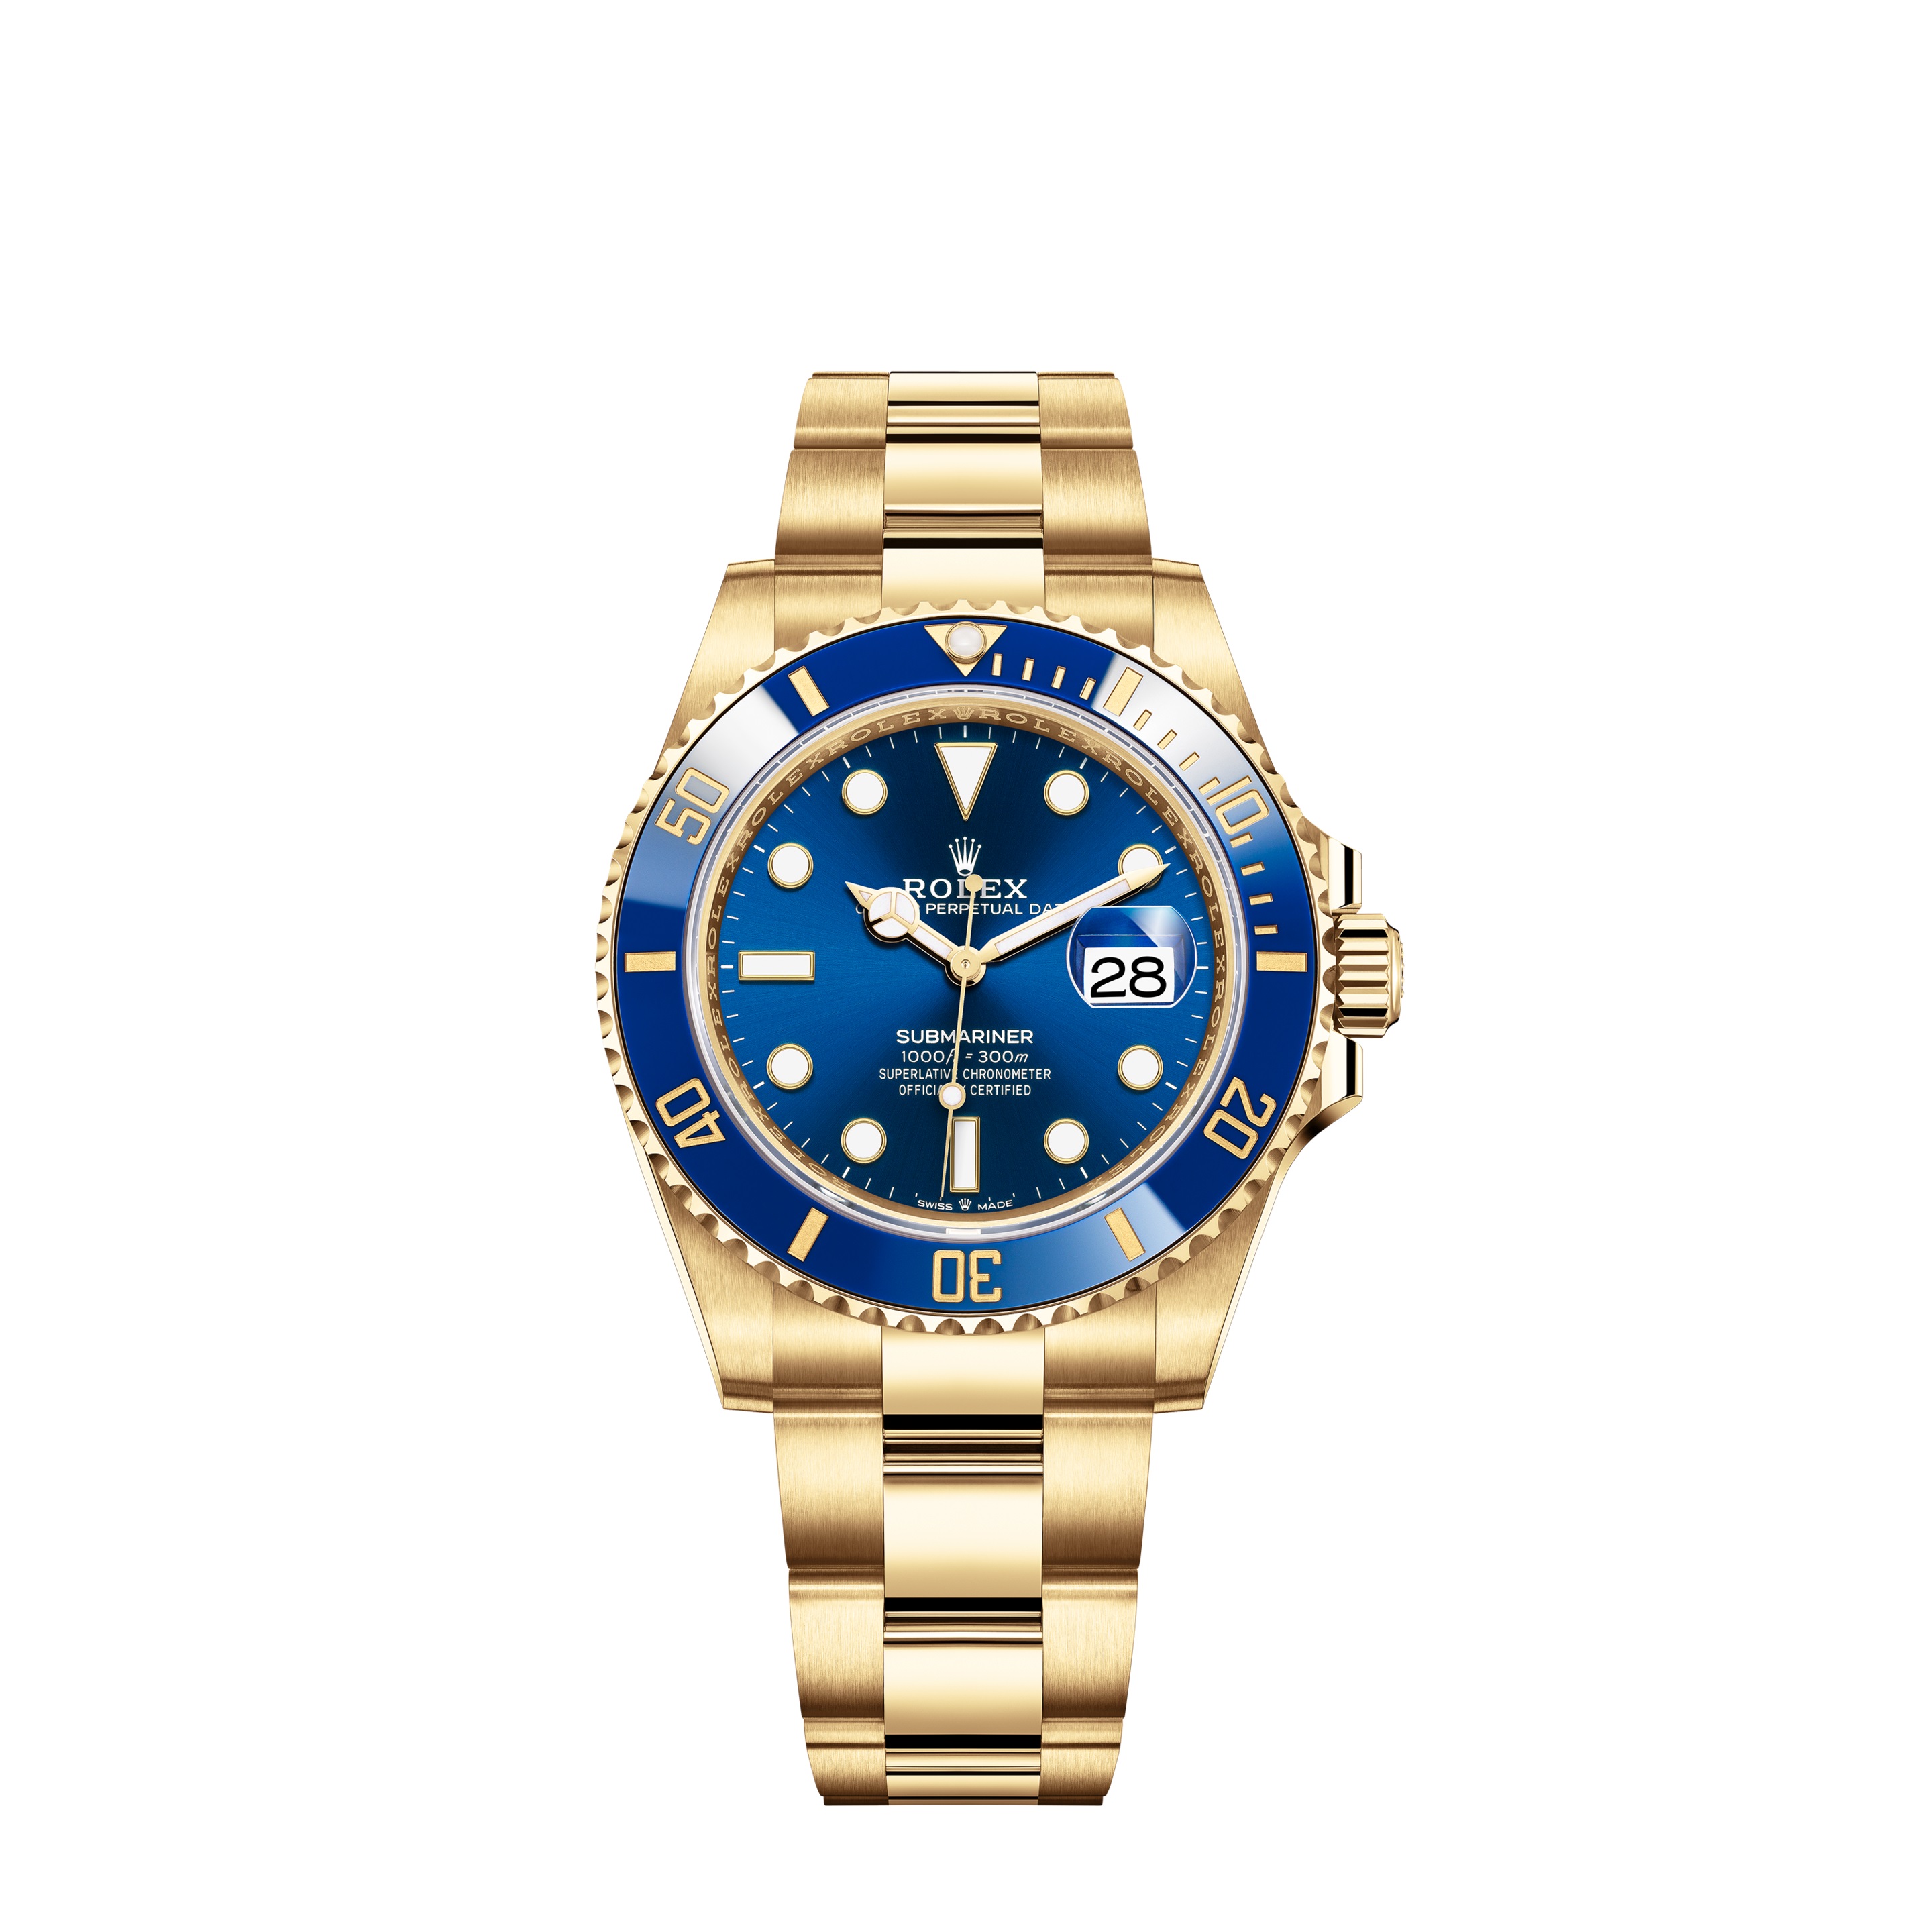 Submariner Date 126618LB Gold Watch (Royal Blue)